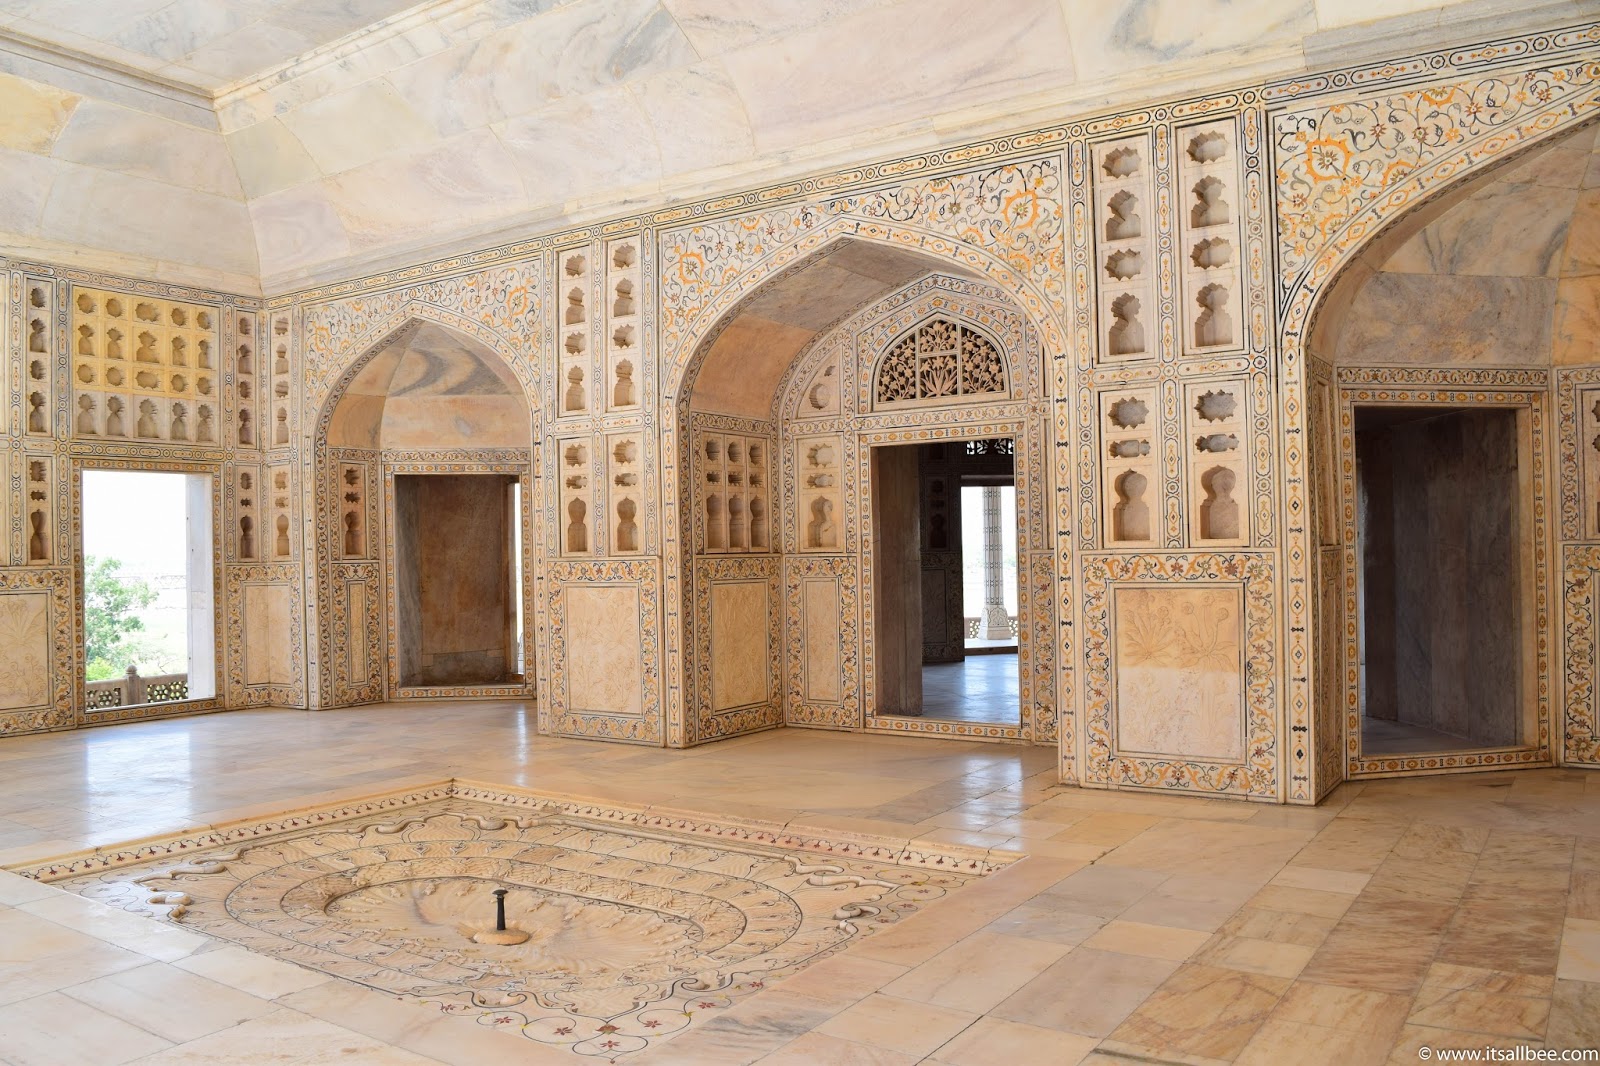 Visiting of The Agra Fort - Photo by Bianca Malata - www.itsallbee.com